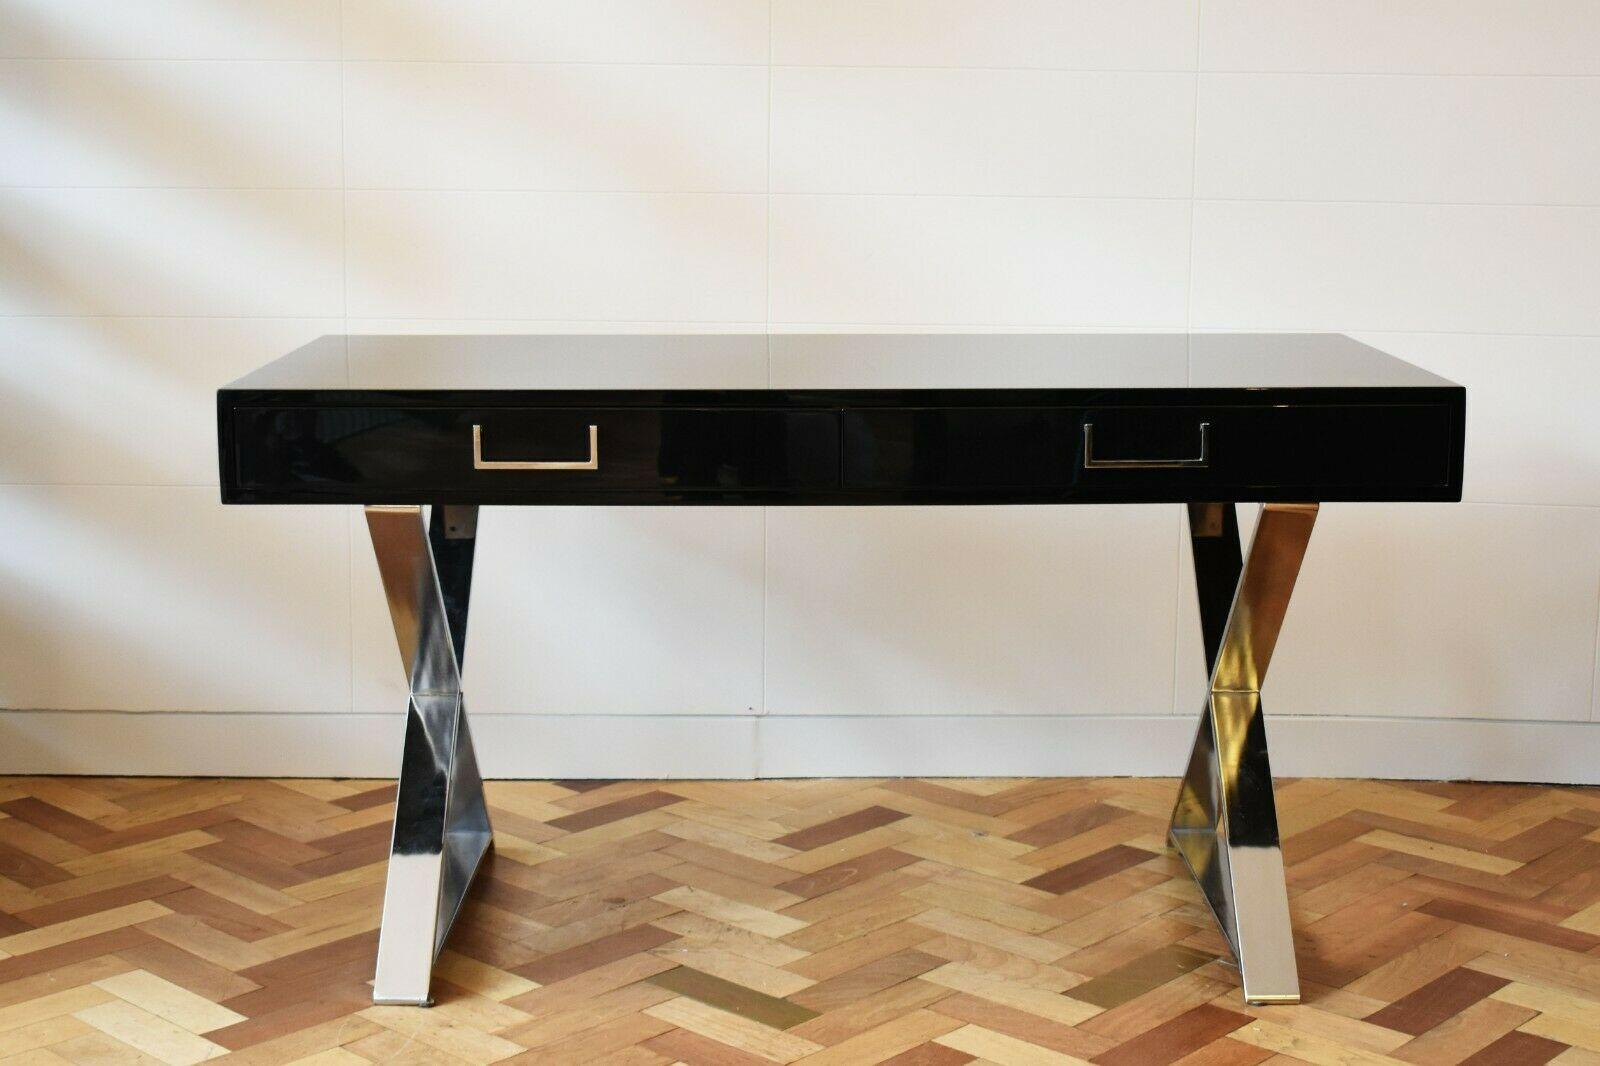 A 1970's campaign desk designed by Milo Baughman and produced by Thayer Coggin.

It's elegant simplicity makes it a versatile and beautiful addition to any room as a console, writing table/desk or a dressing table. It's black lacquer finish